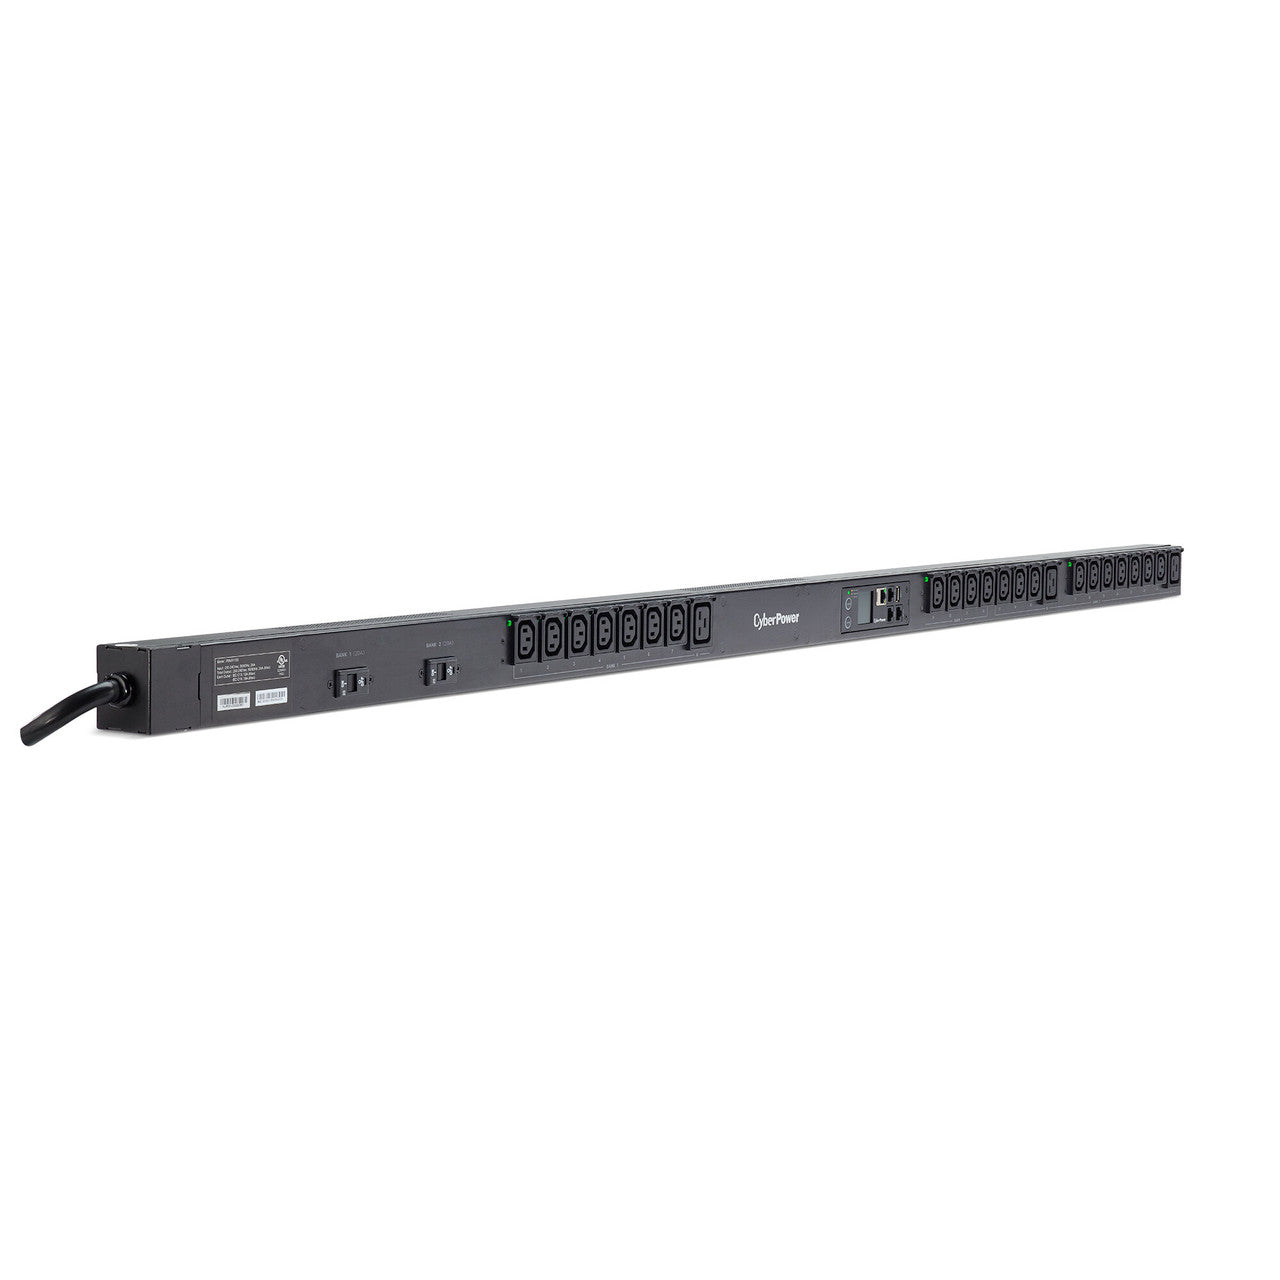 CyberPower PDU81105 Metered-by-Outlet Switched PDU 30A 208V L6-30P Input (21) C13 (3) C19 Output 10ft Cord 0U 3yr Wty